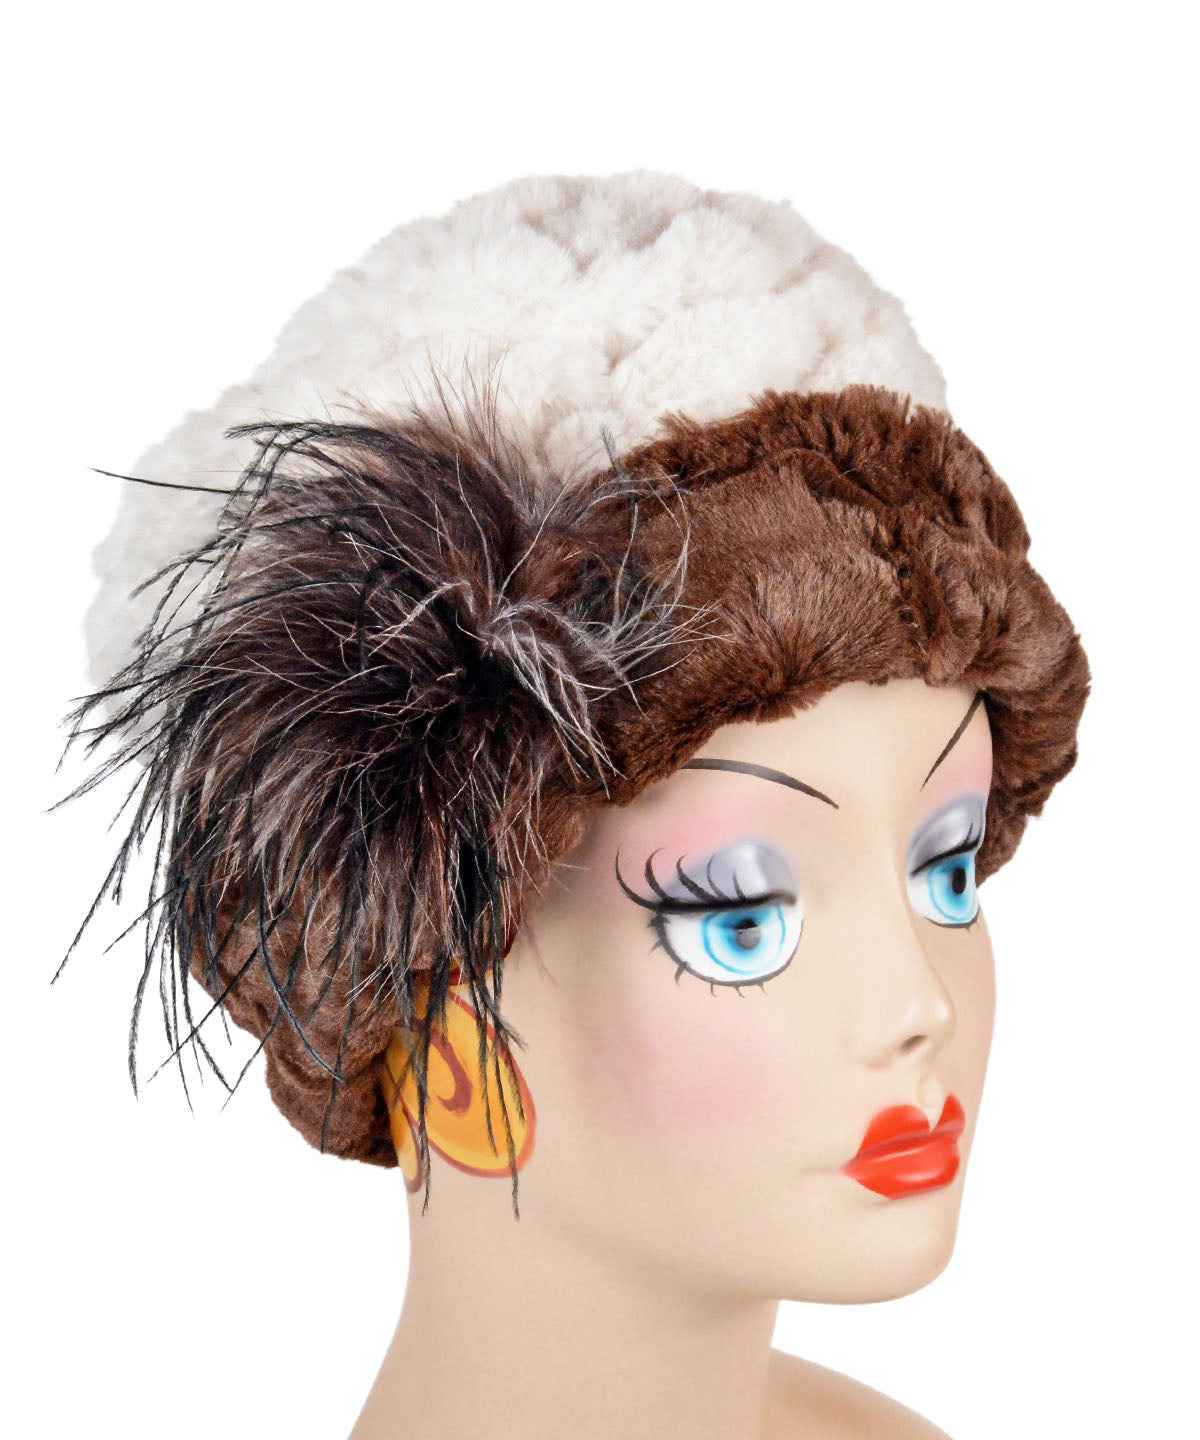 Cuffed Pillbox Hat, Reversible Two Tone Plush Faux Fur in Falkor Lined with Cuddly Fur in Chocolate with Black, Gray and Mauve Ostrich Feather Brooch by Pandemonium Millinery. Handmade in Seattle WA USA.